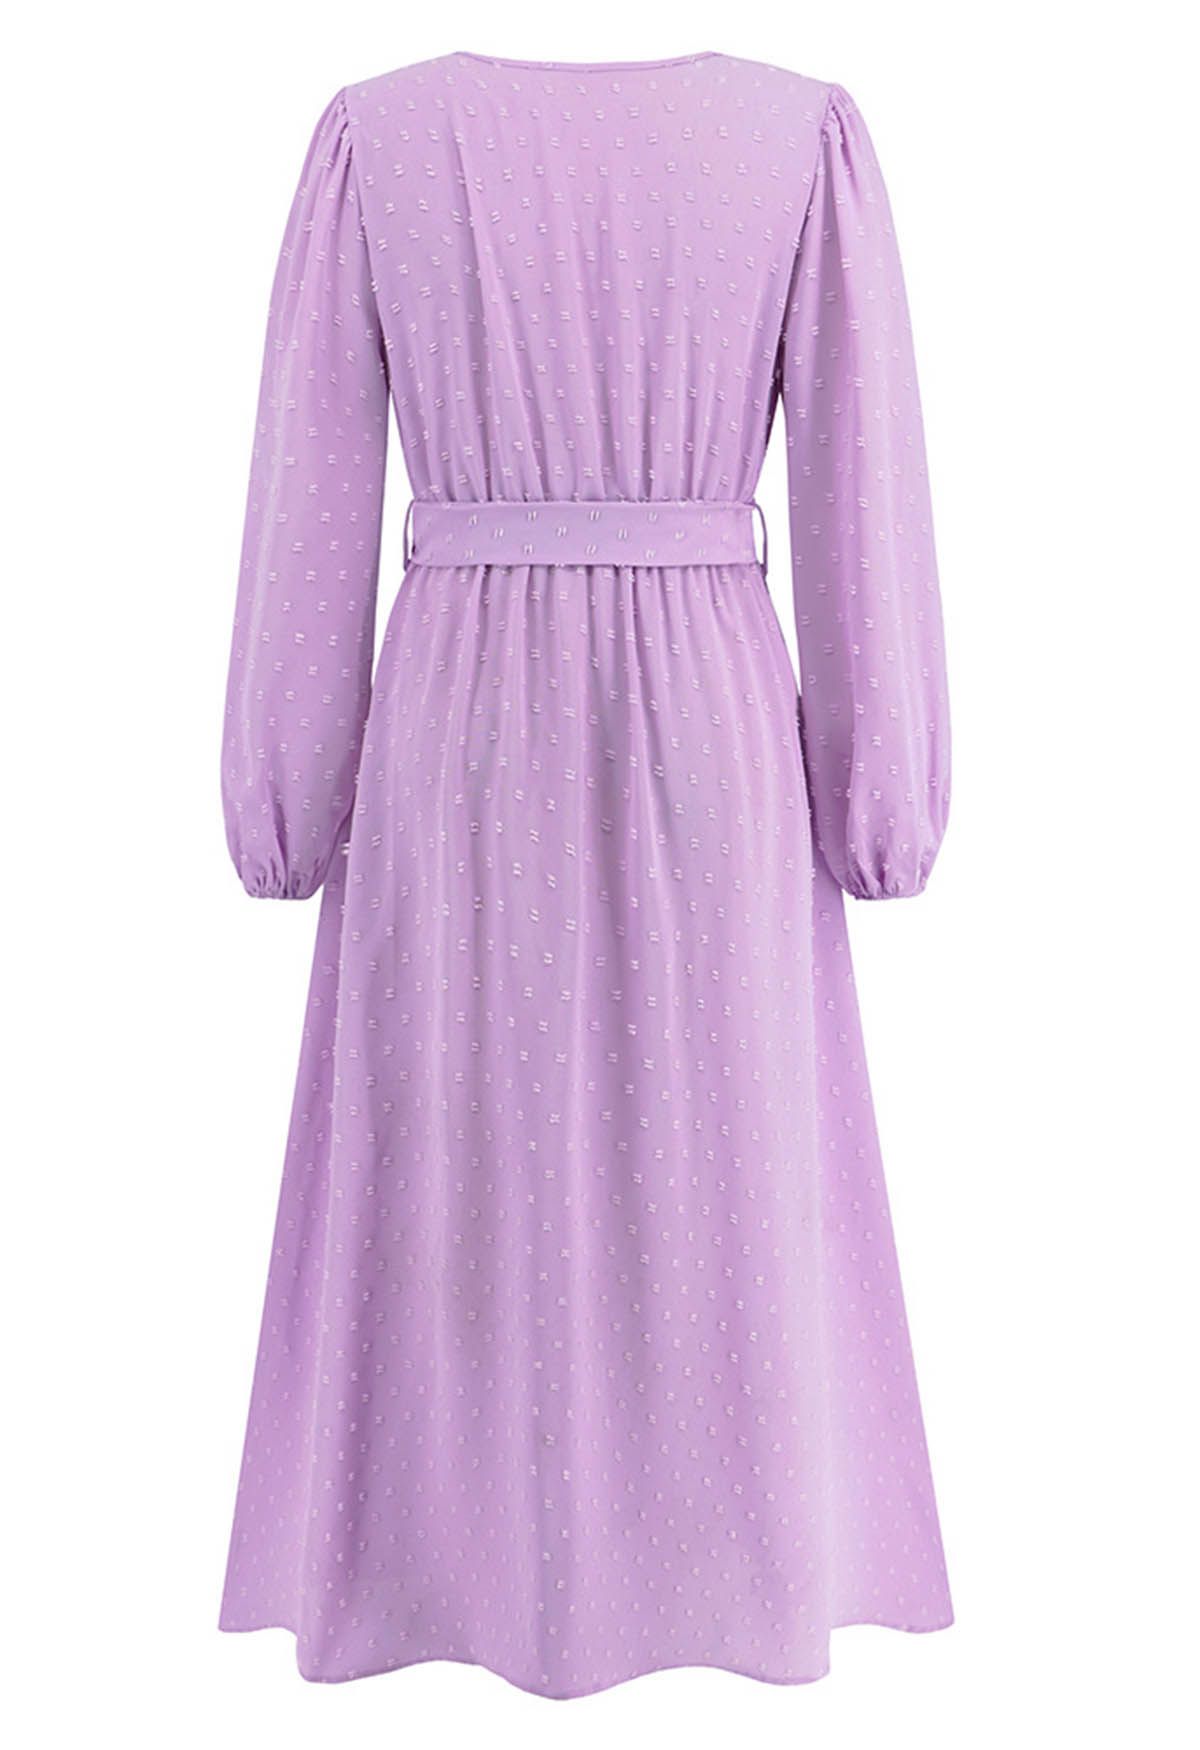 Flock Dot Jacquard Faux-Wrap Belted Dress in Lilac - Retro, Indie and ...